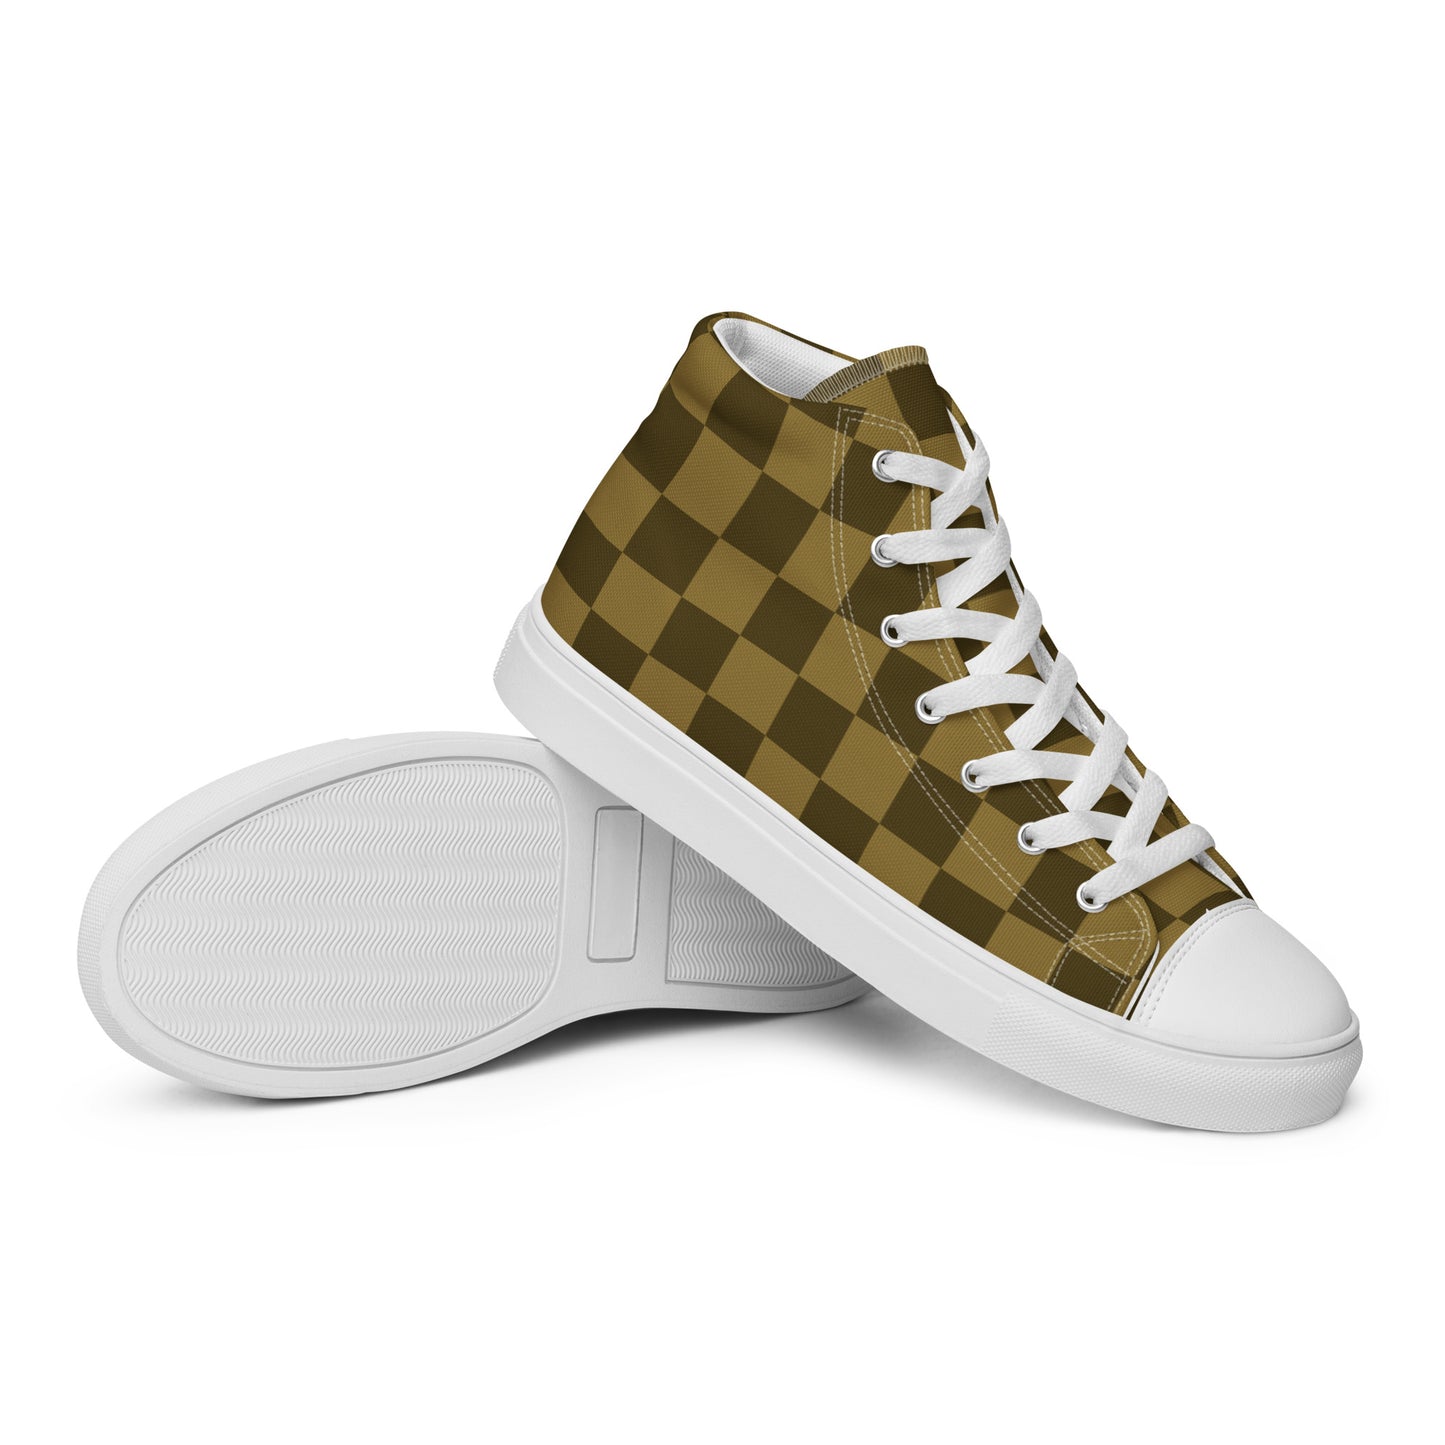 Wempy Dyocta Koto Signature Casual - Sustainably Made Women’s high top canvas shoes